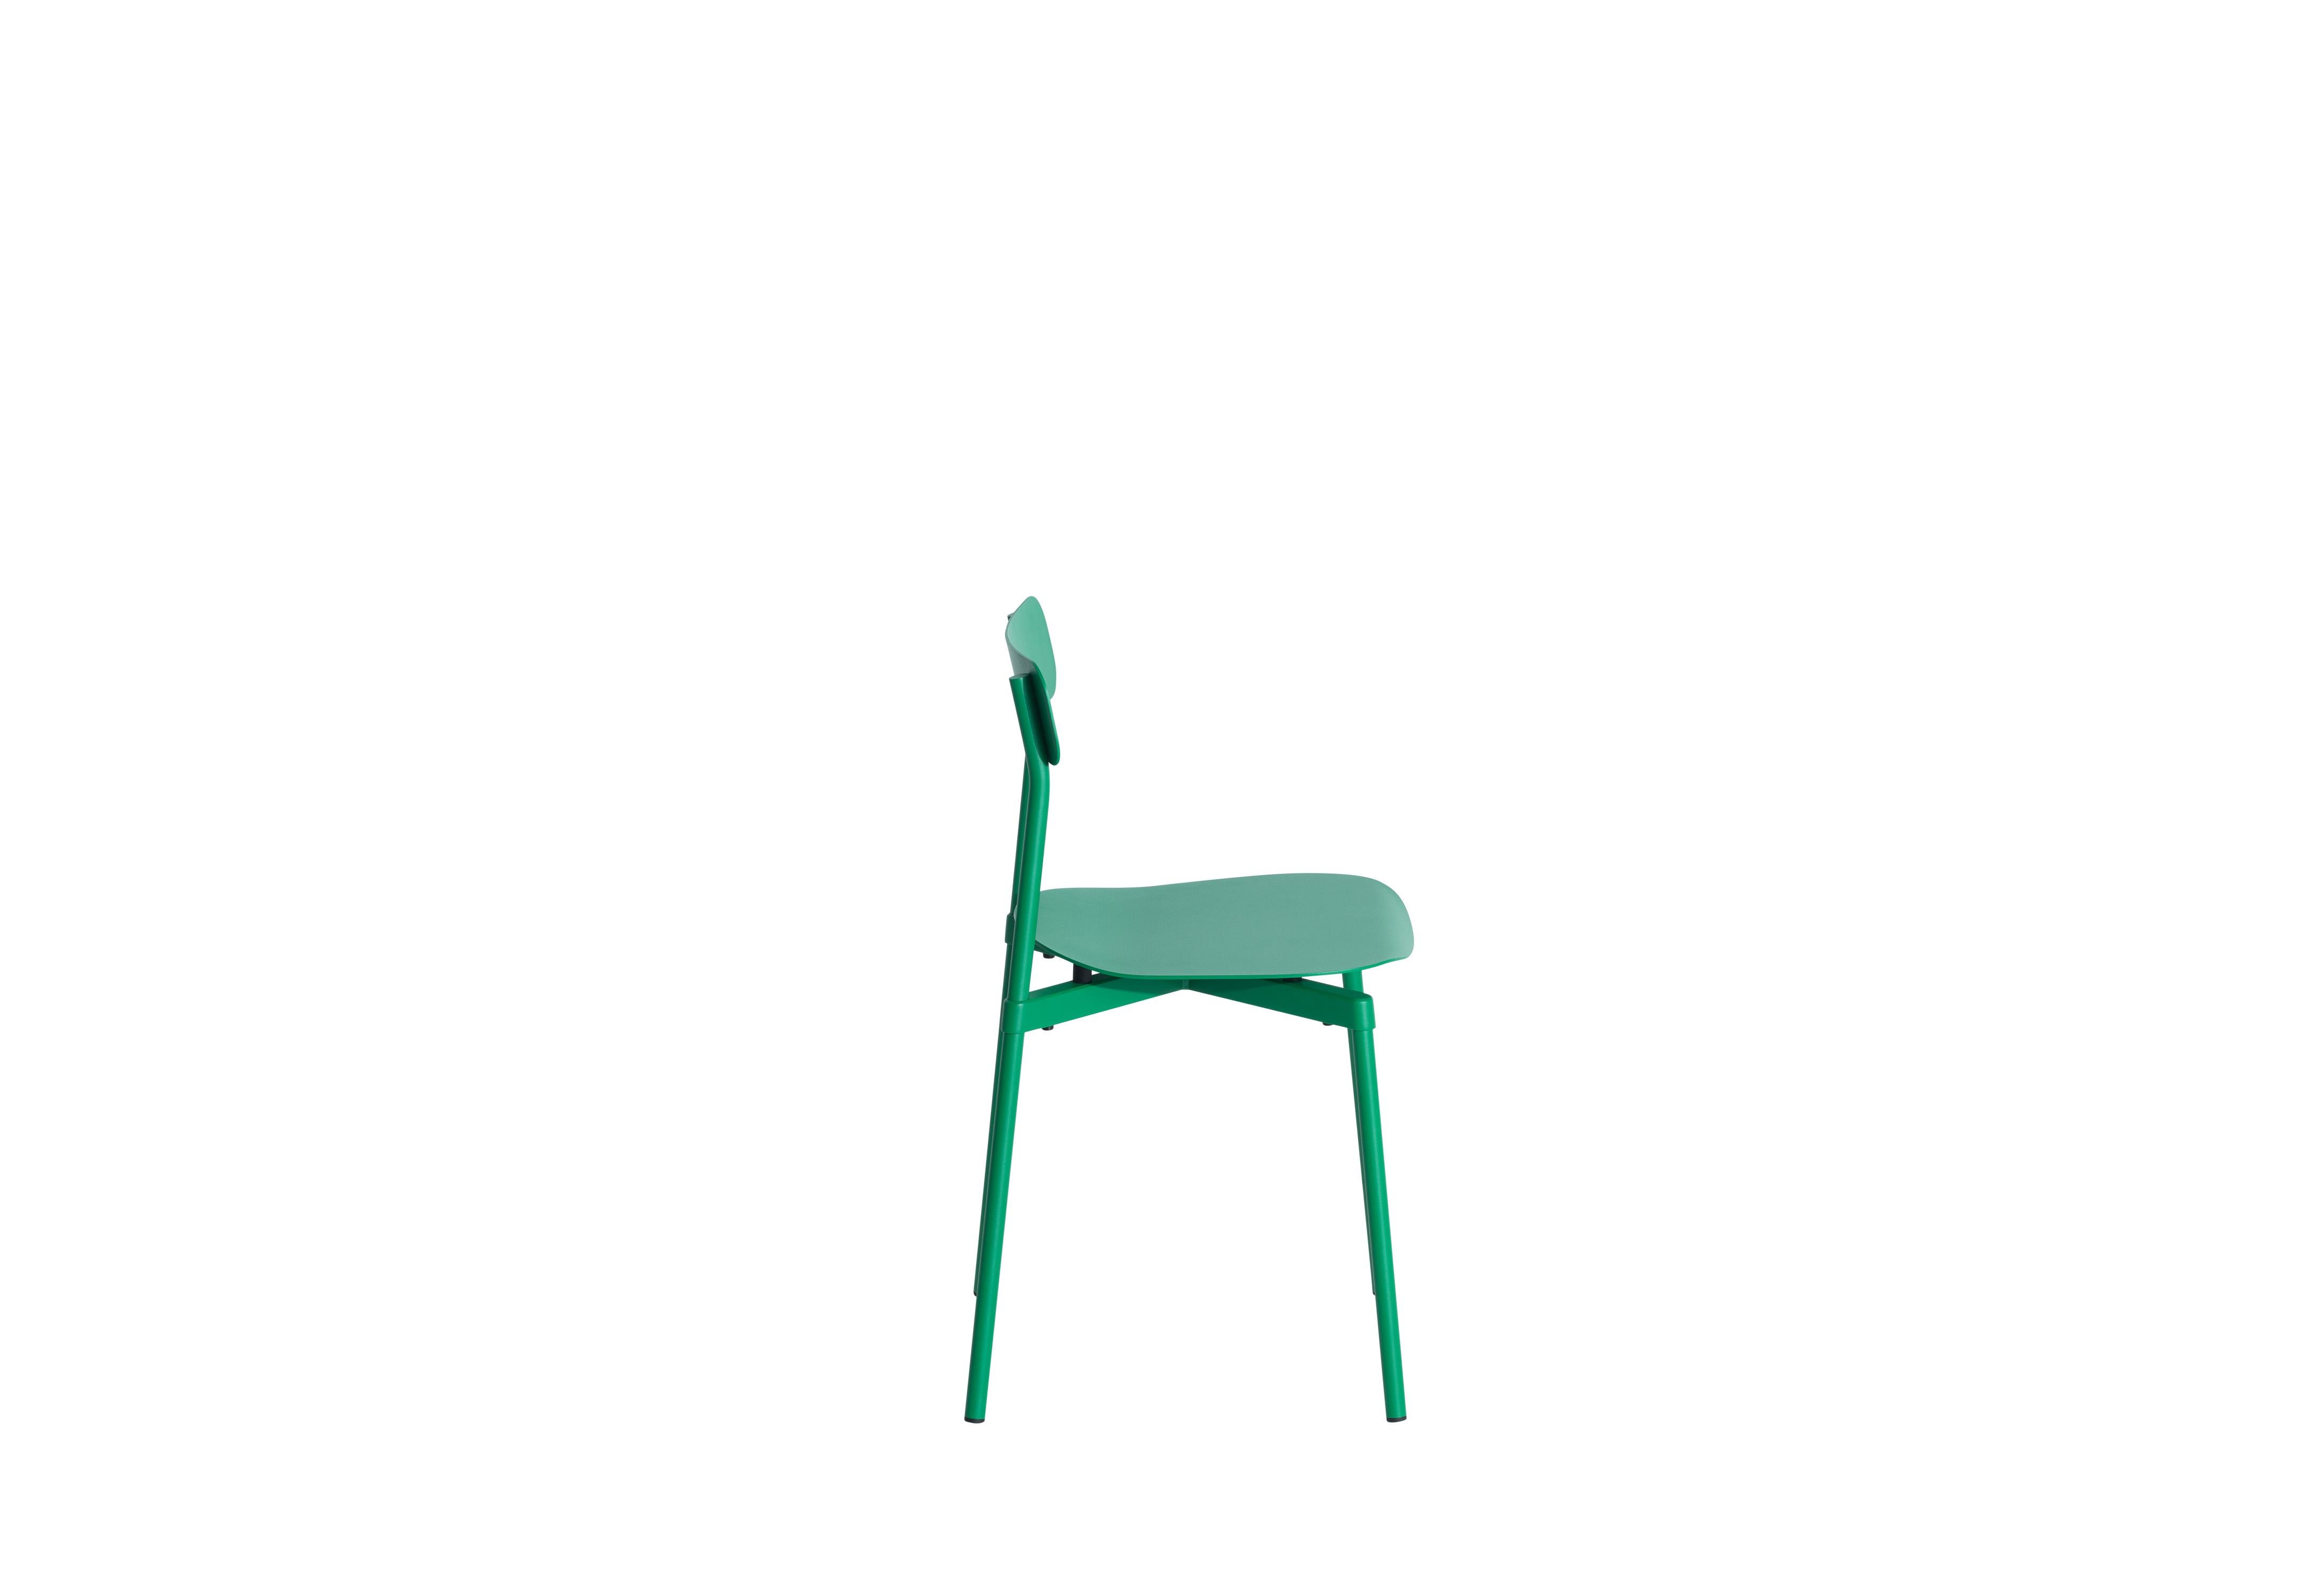 Petite Friture Fromme Chair in Mint-green Aluminium by Tom Chung, 2019

The Fromme chair stands out by its pure line and compact design. Absorbers placed under the seating gives a soft and very comfortable flexibility to the chair. Made from